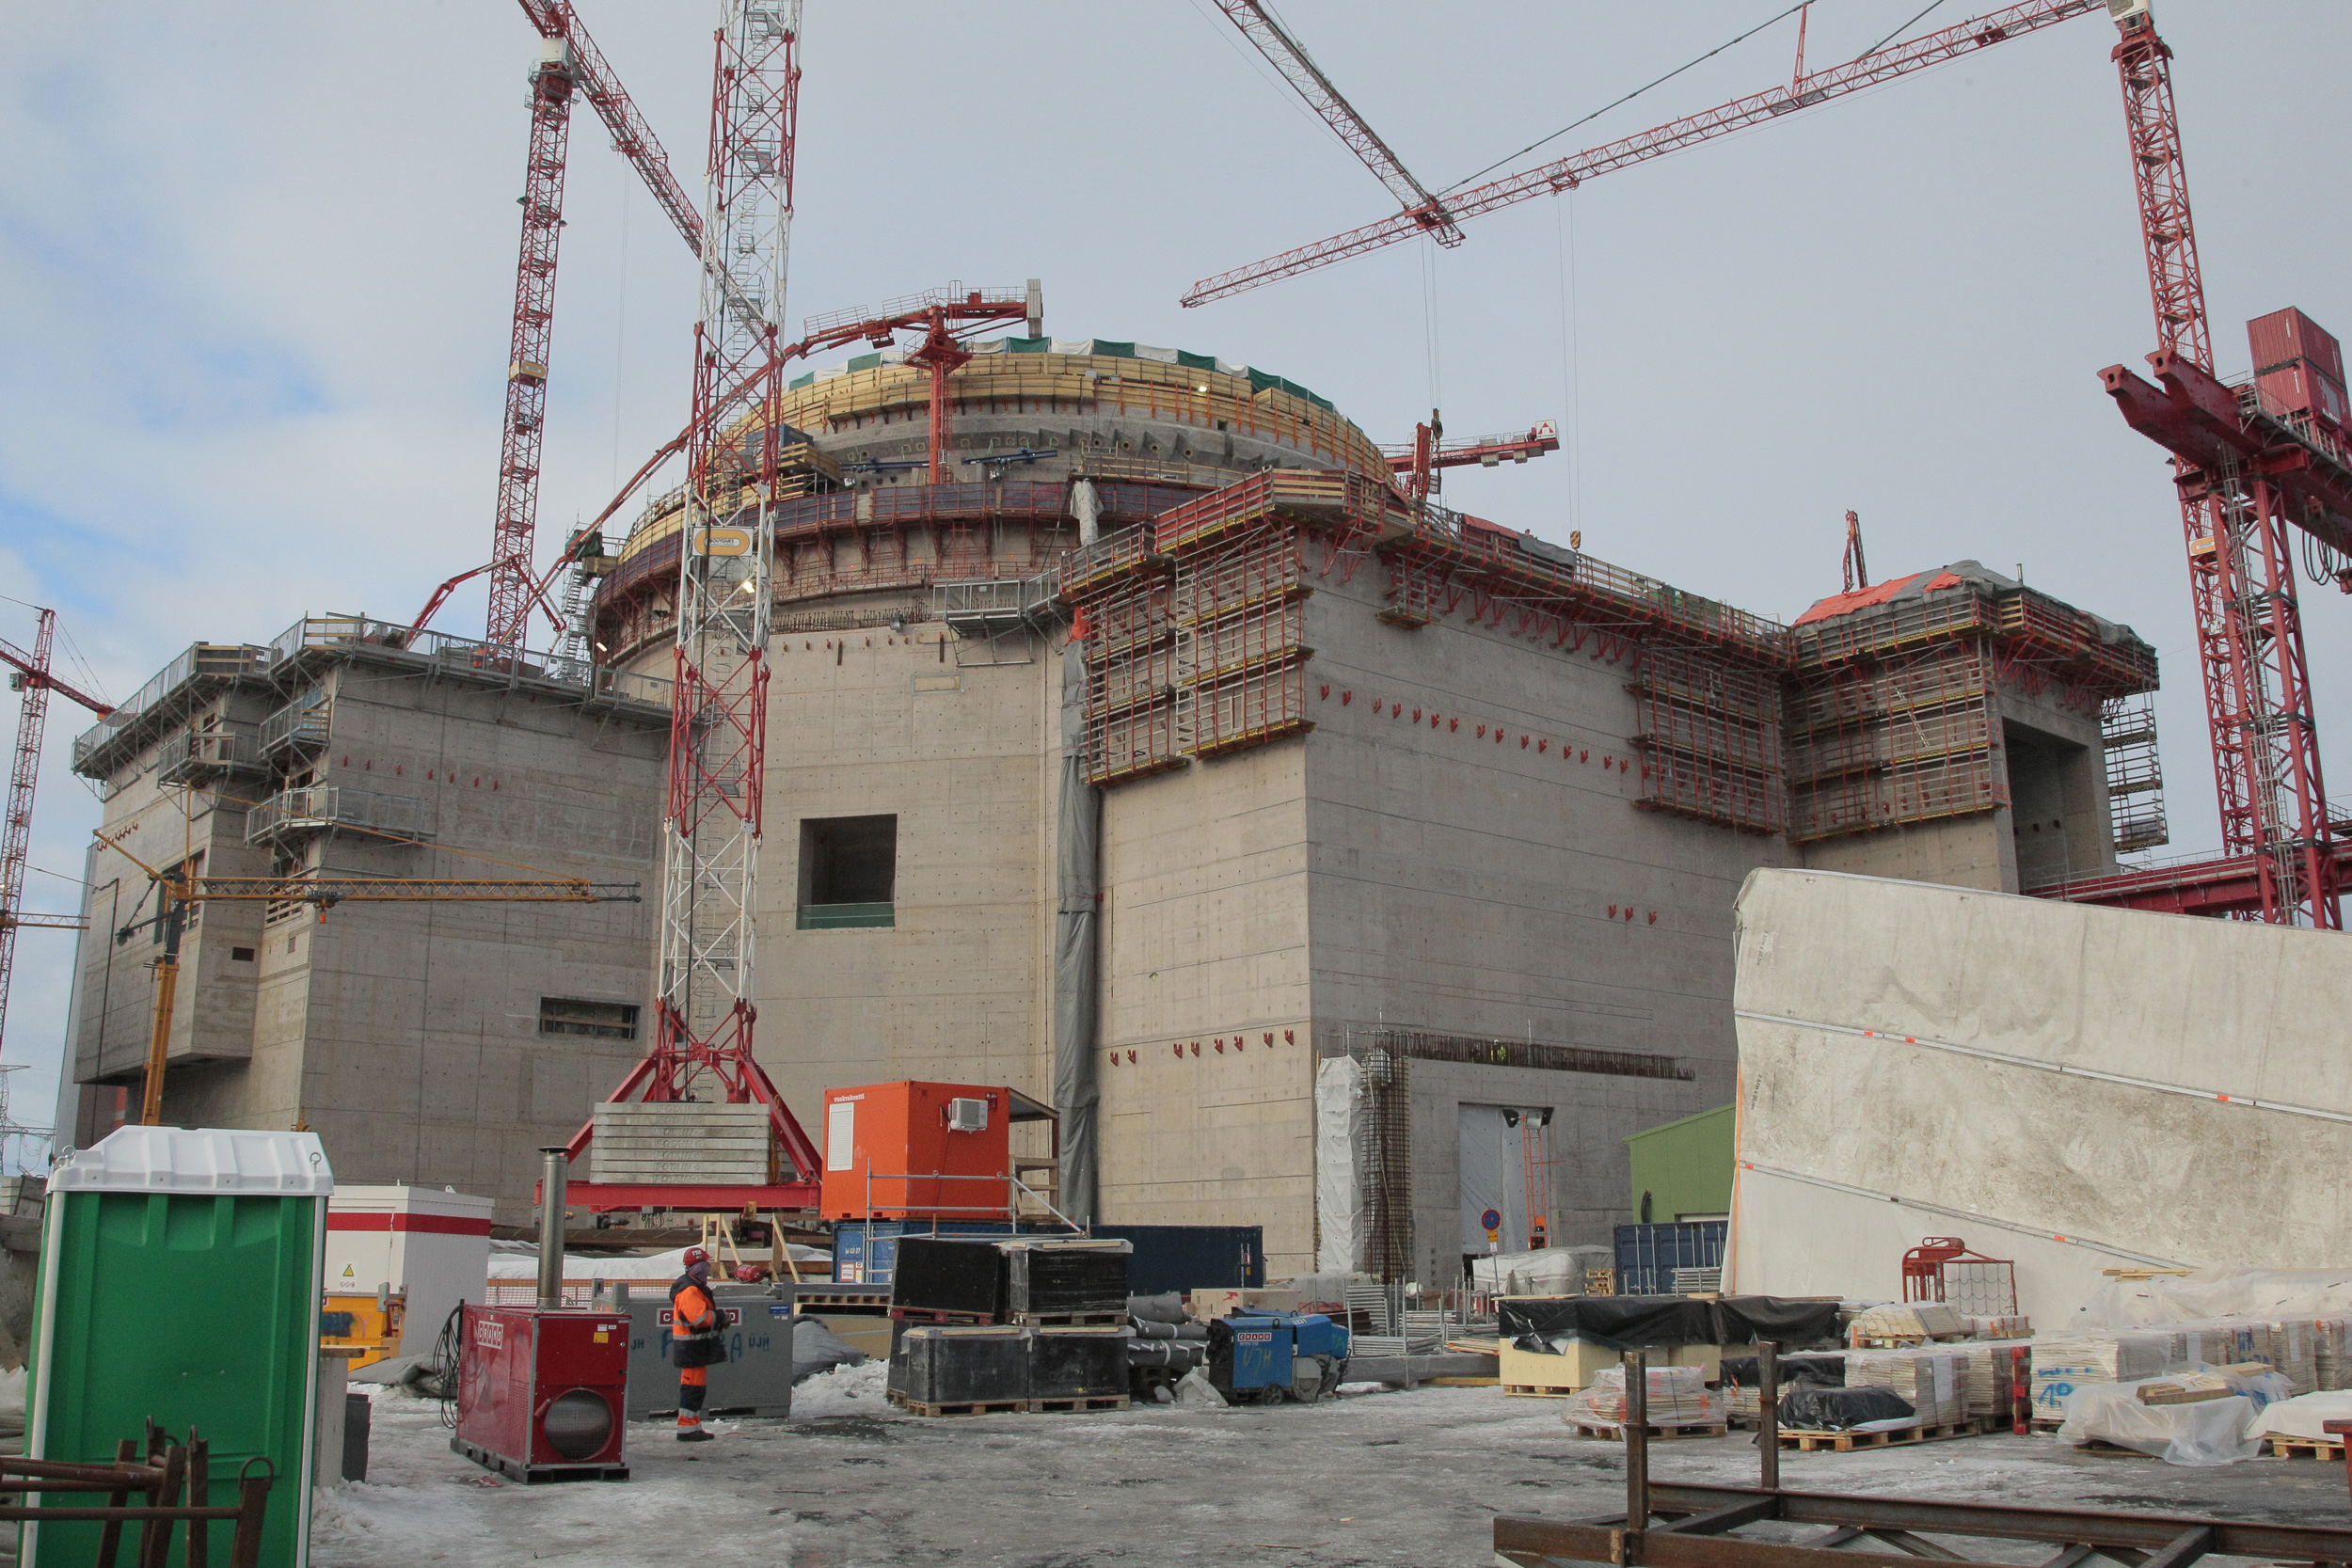 The nuclear power plant Olkiluoto 3 is pictured under construction on March 15, 2010 in Olkiluoto, south-western Finland. (AFP/Getty Images)